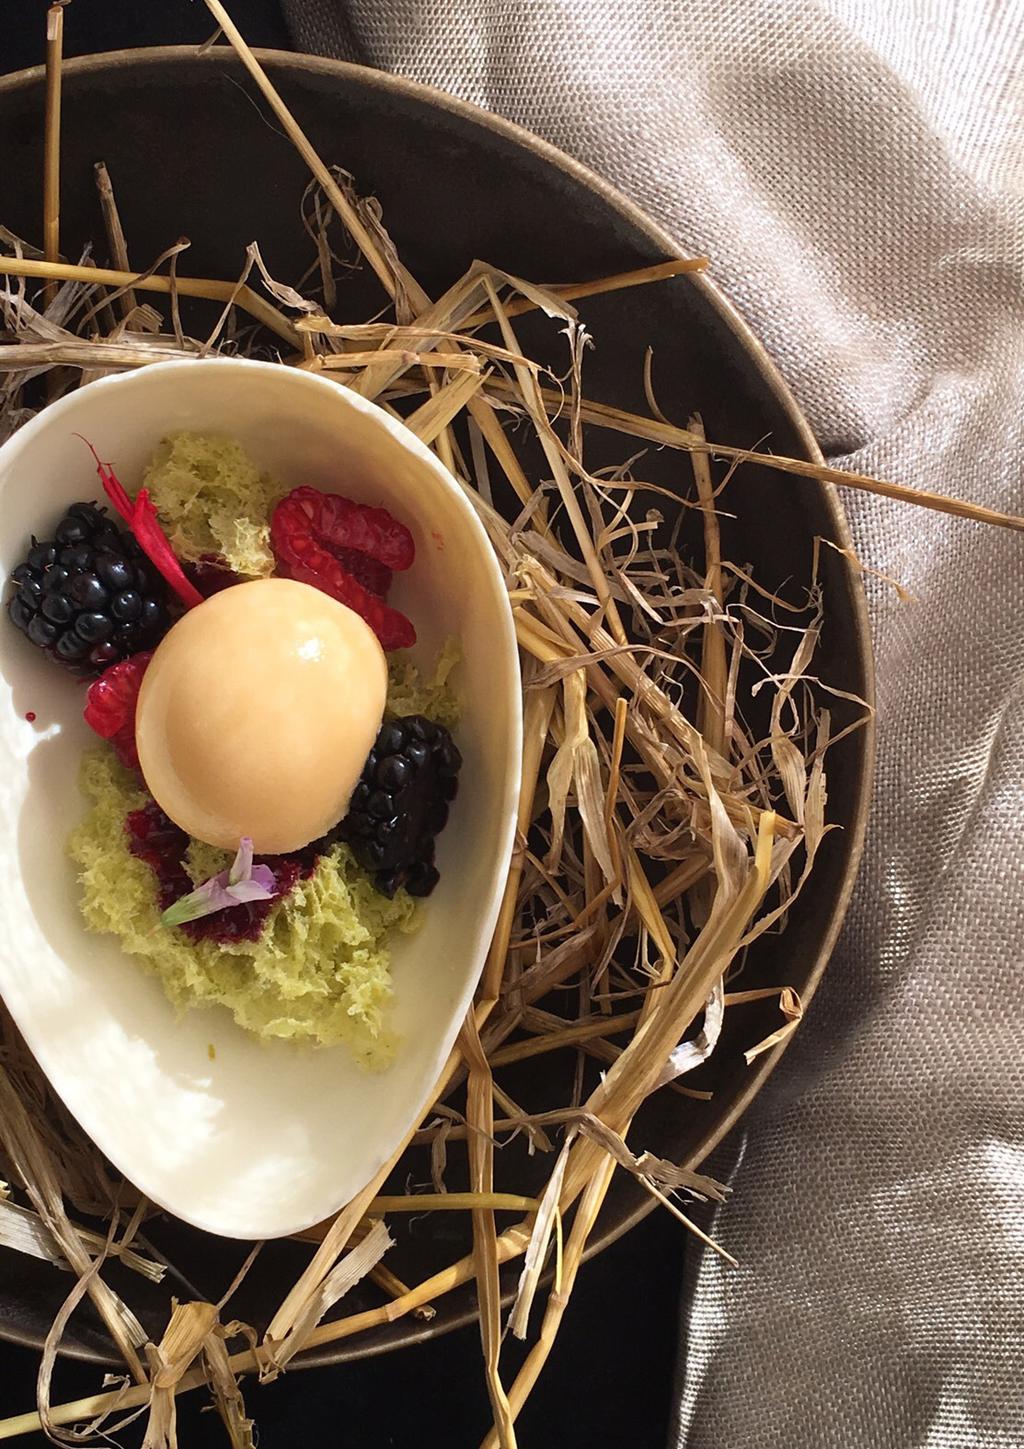 easter egg white chocolate-raspberry-pistachio BY RAFA DELGADO The sour taste of Jaine White Chocolate from the Selváticas line combines perfectly with raspberries, blackberries and tangerine sherbet.